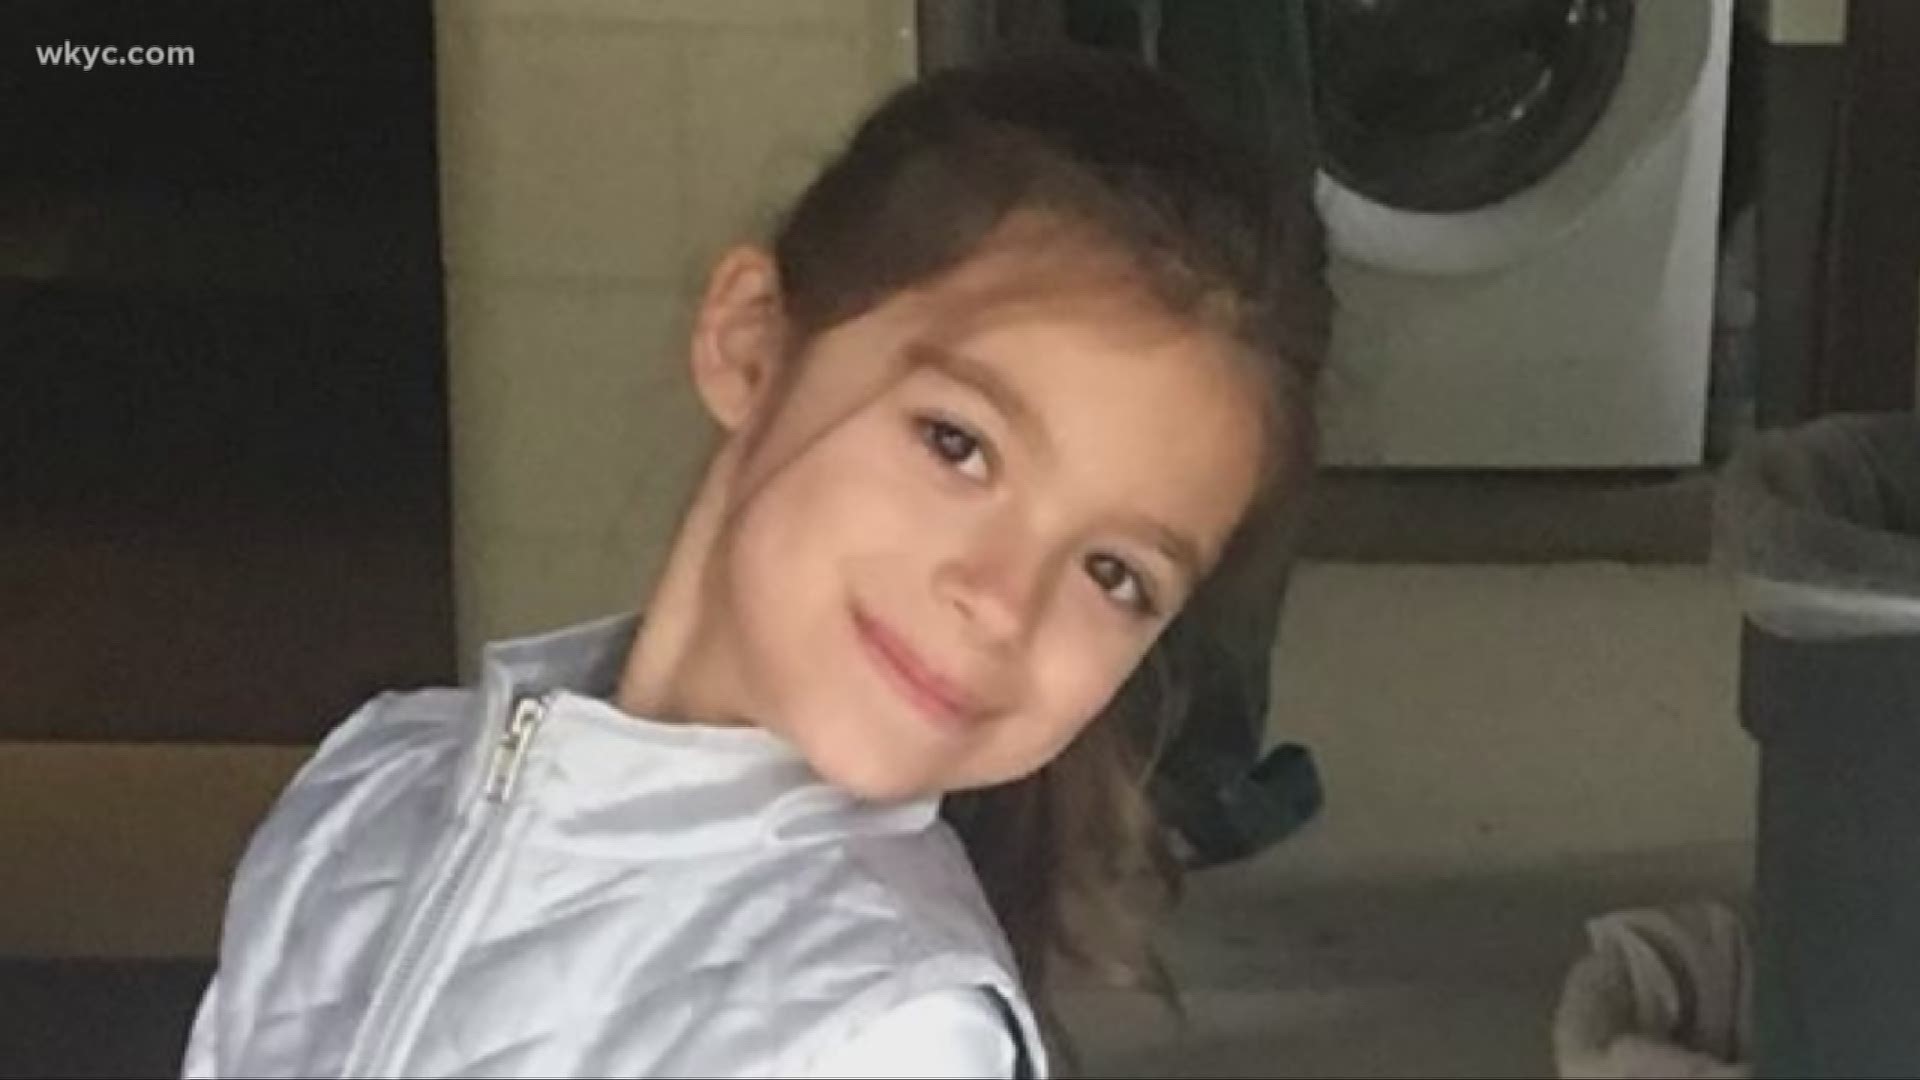 The legacy of an 8-year-old girl killed in Mayfield fire will live on